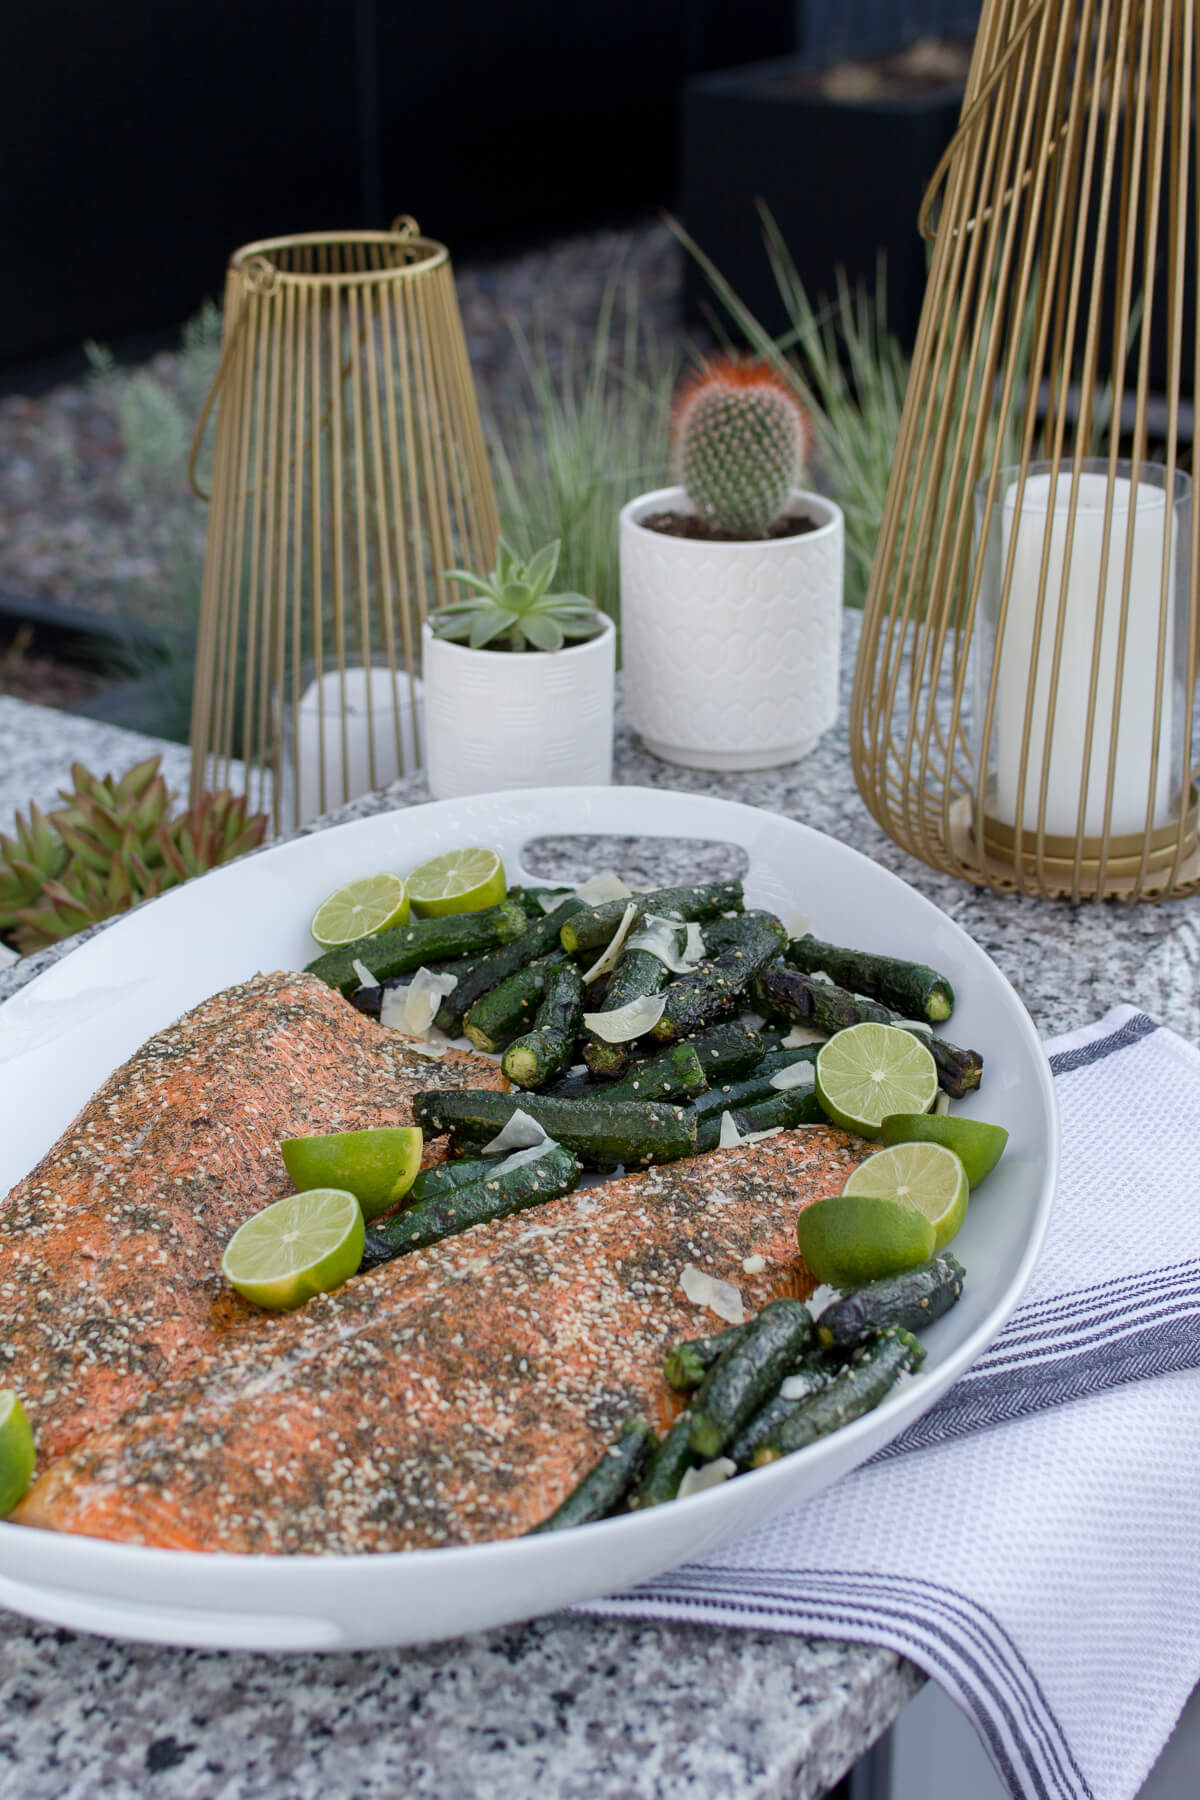 Enjoy this fresh Steelhead Trout recipe that's been rubbed with a sesame-dill seasoning and grilled slowly over a cedar plank. Serve with a delicious, roasted red pepper sauce with a hint of spice. Recipe at www.designsofanykind.com